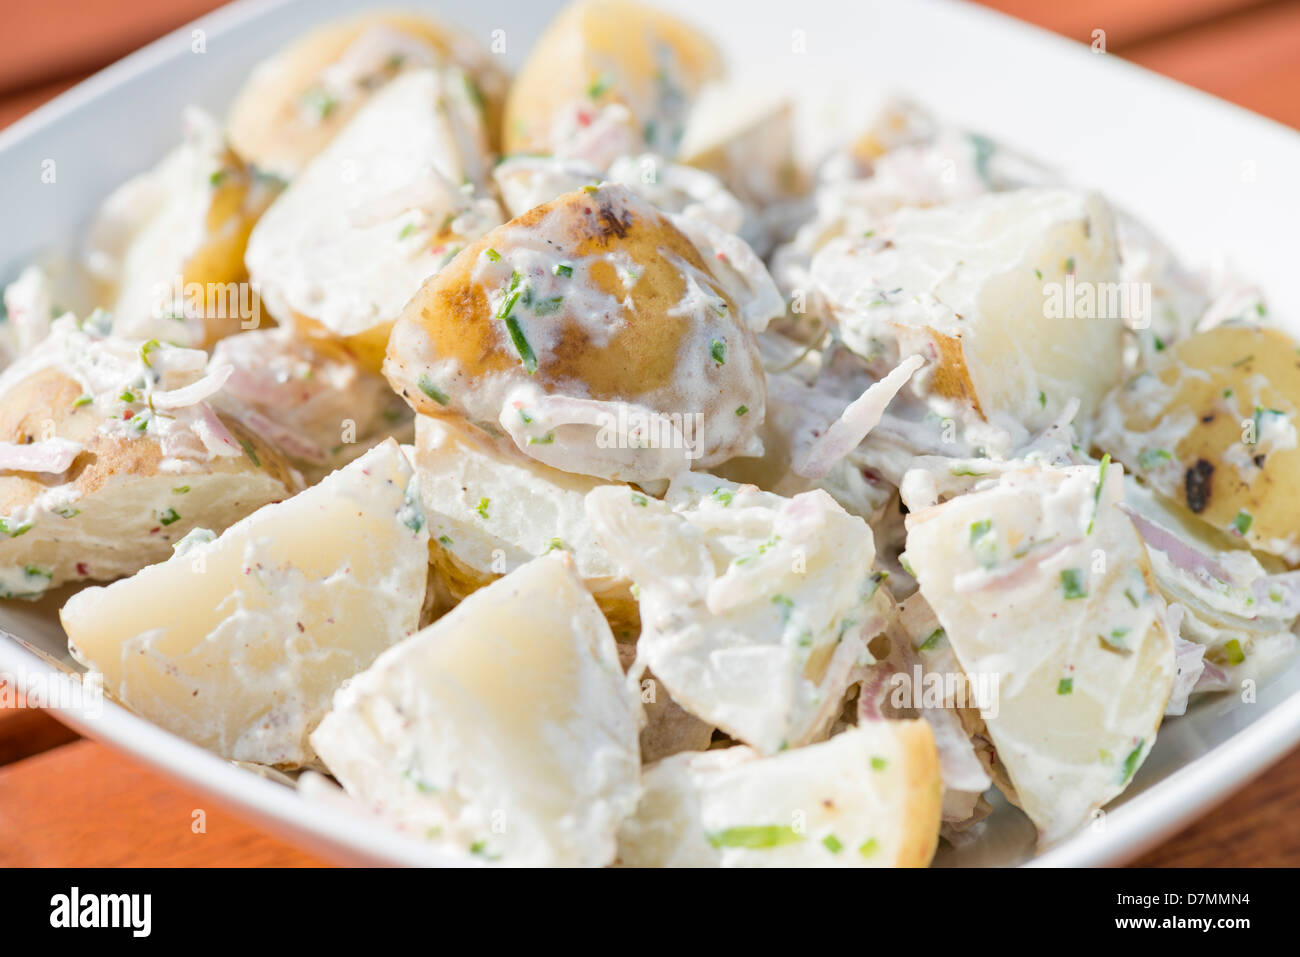 Potato Salad with shallots. Typical BBQ side dish. Stock Photo